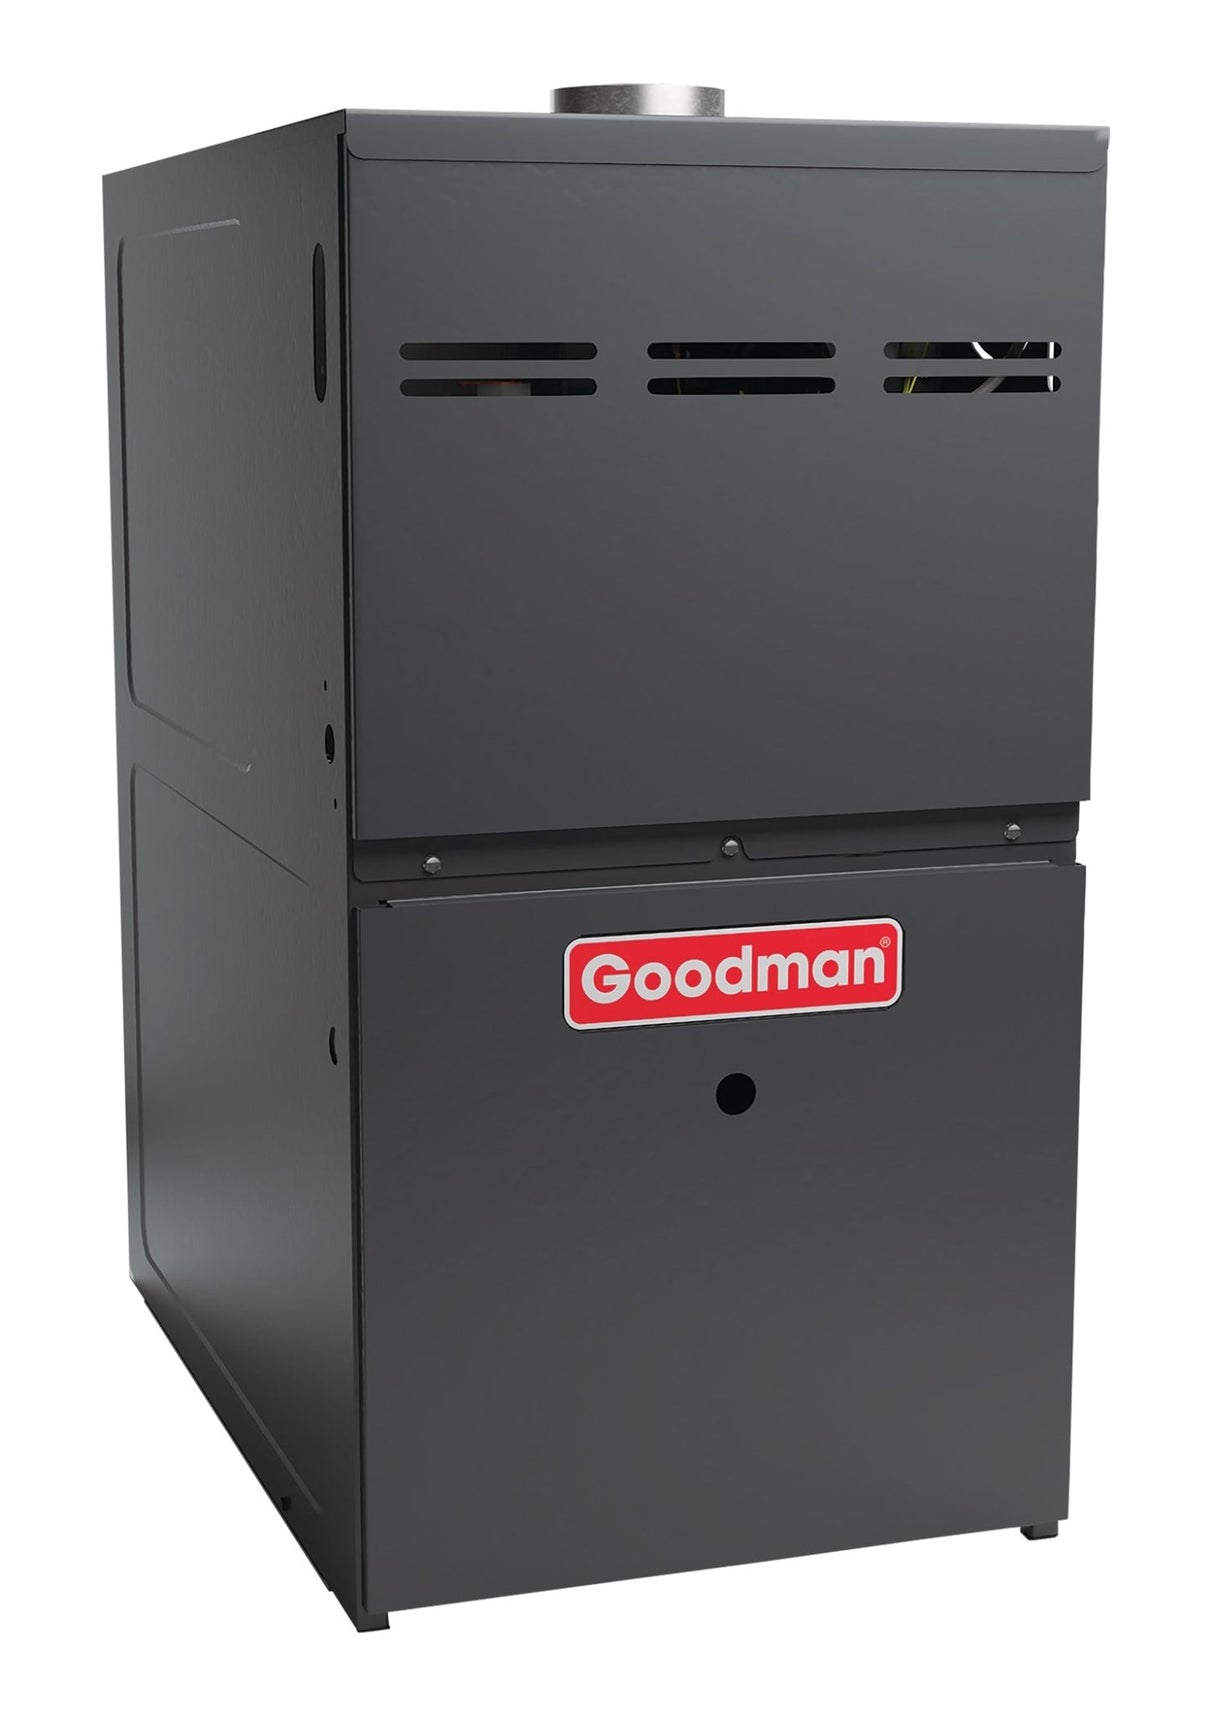 Goodman 1.5 Ton 14.5 SEER 80% 60,000 BTU Gas Furnace and Air Conditioner System Upflow GM9S800603AN CAPTA1818A4 GSXN401810 - AC units for less